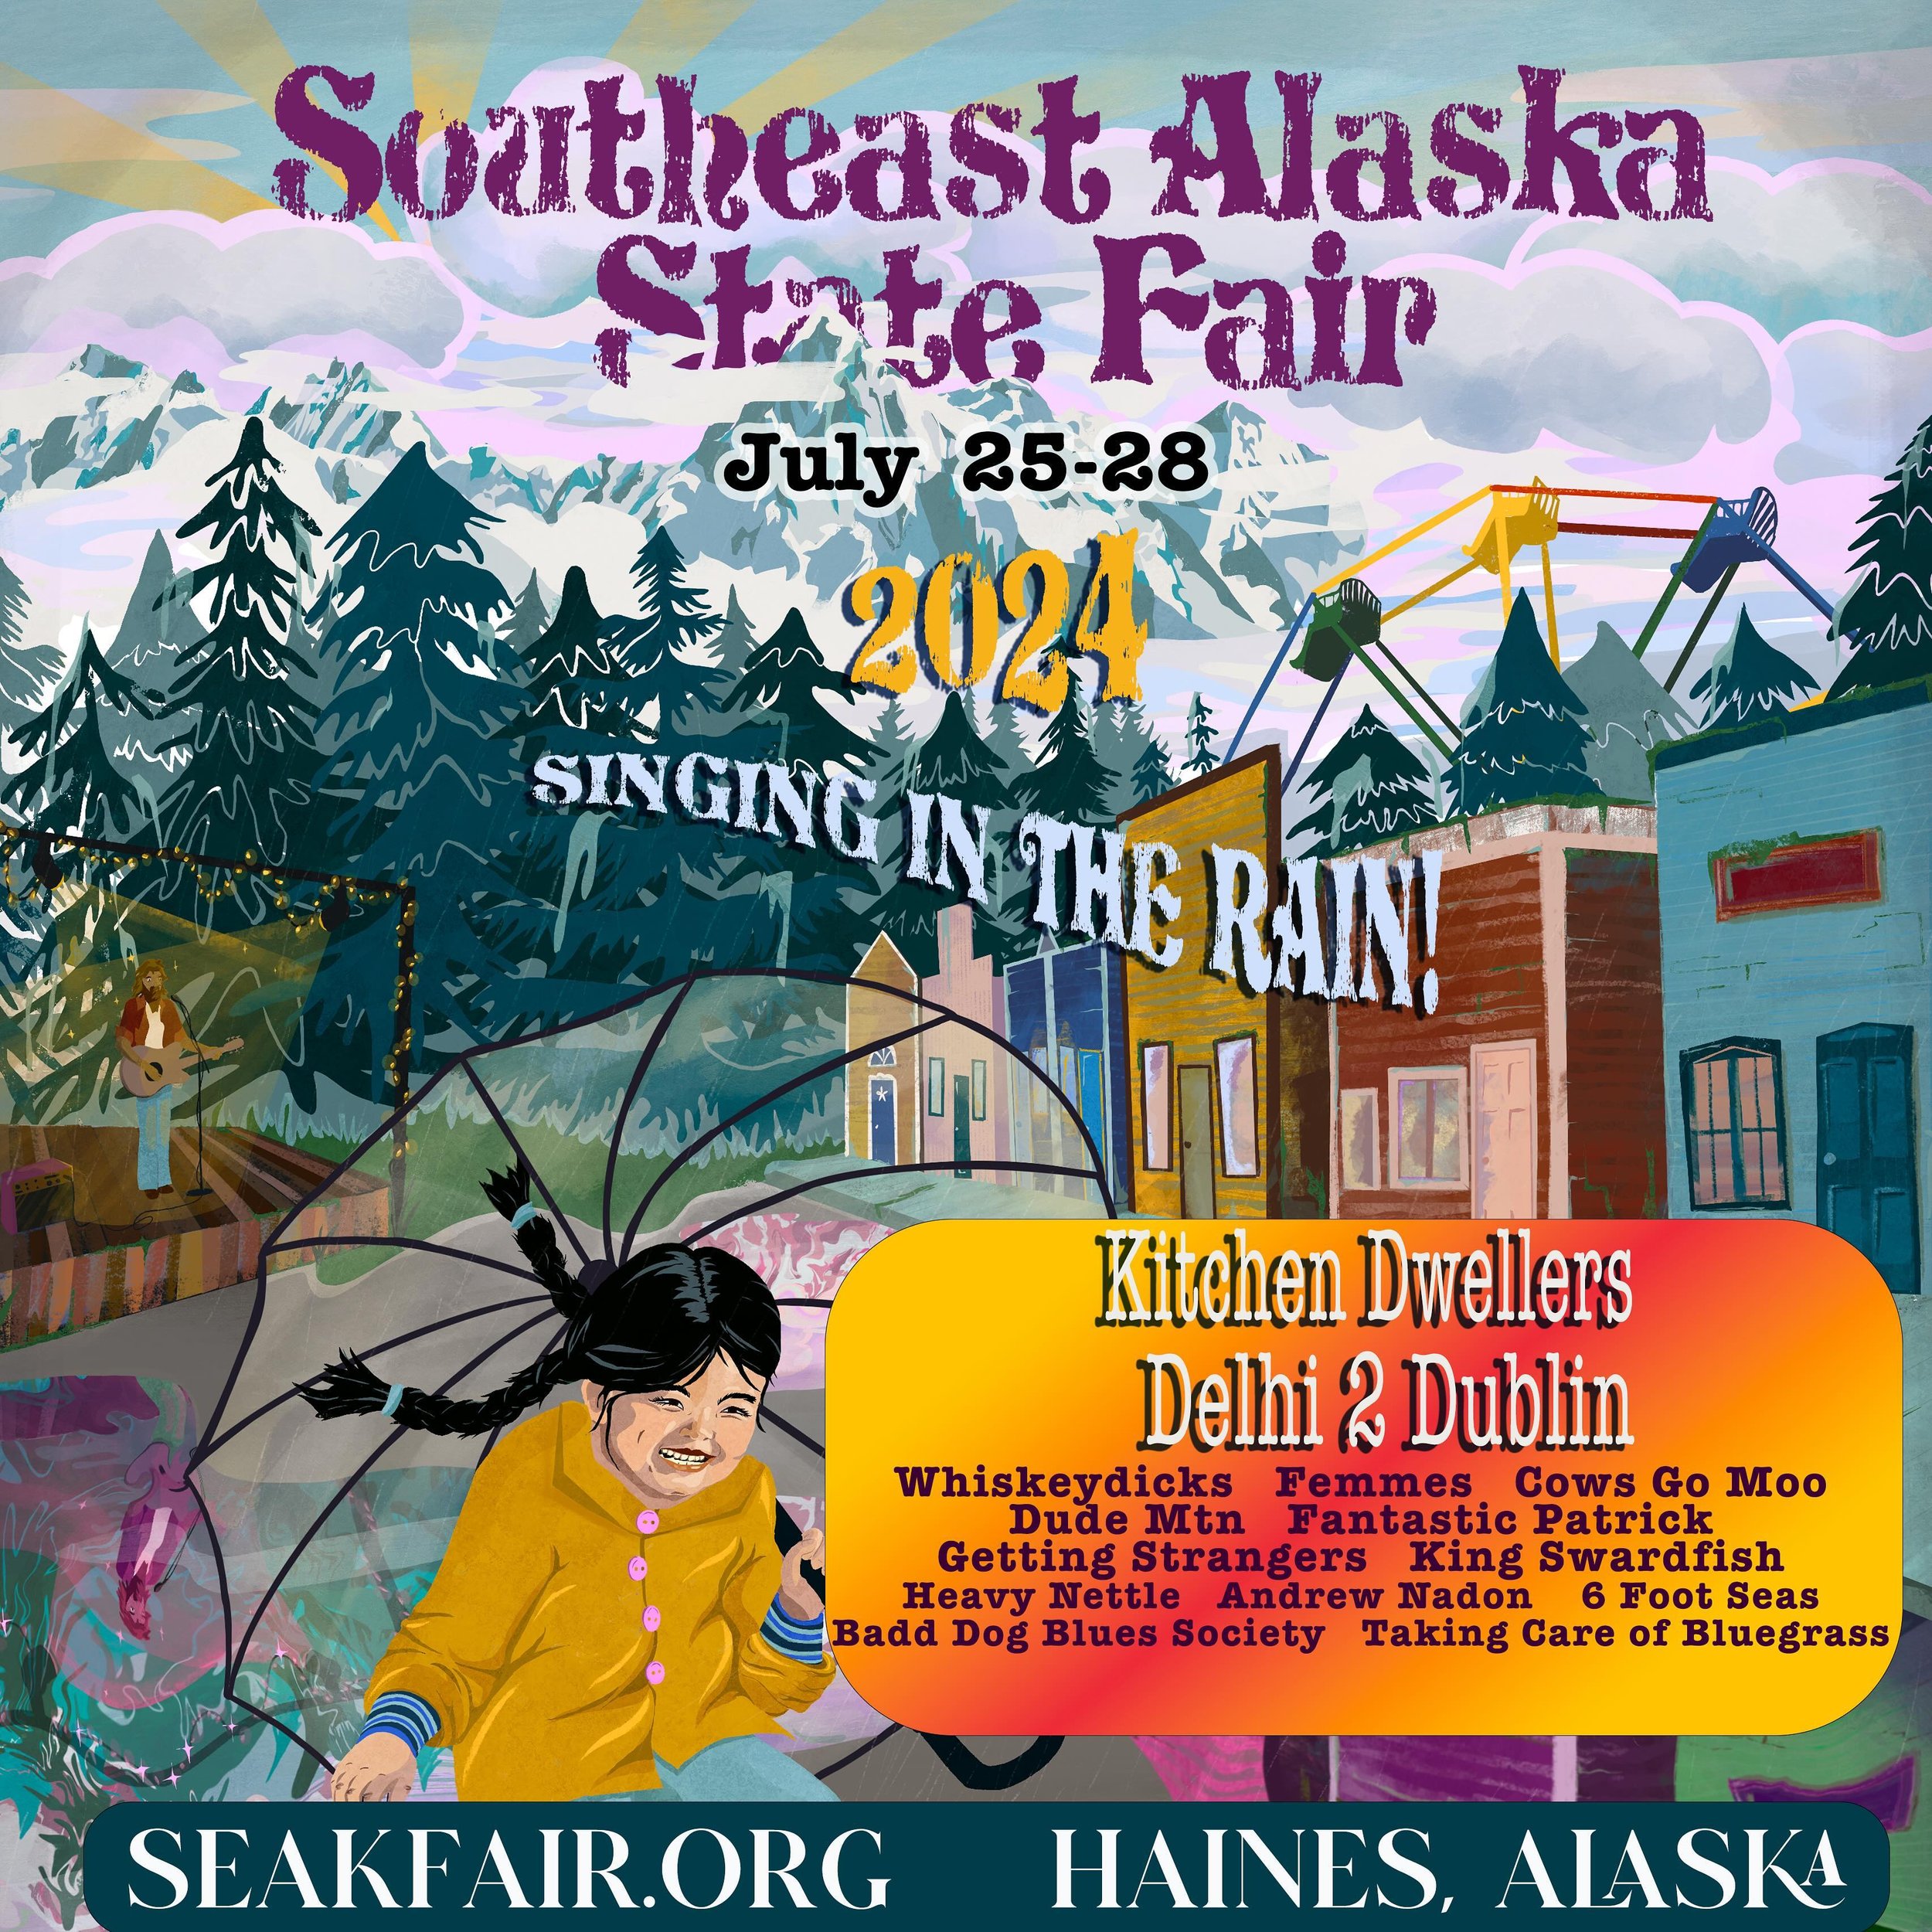 We got another Alaska date for ya this summer❗️Catch us at @seak_fair in Haines, AK on July 27 🙌 We can&rsquo;t wait to explore the land of father Joe Funk! Tickets are on sale now.

🎟️ &rarr; Link in bio / story